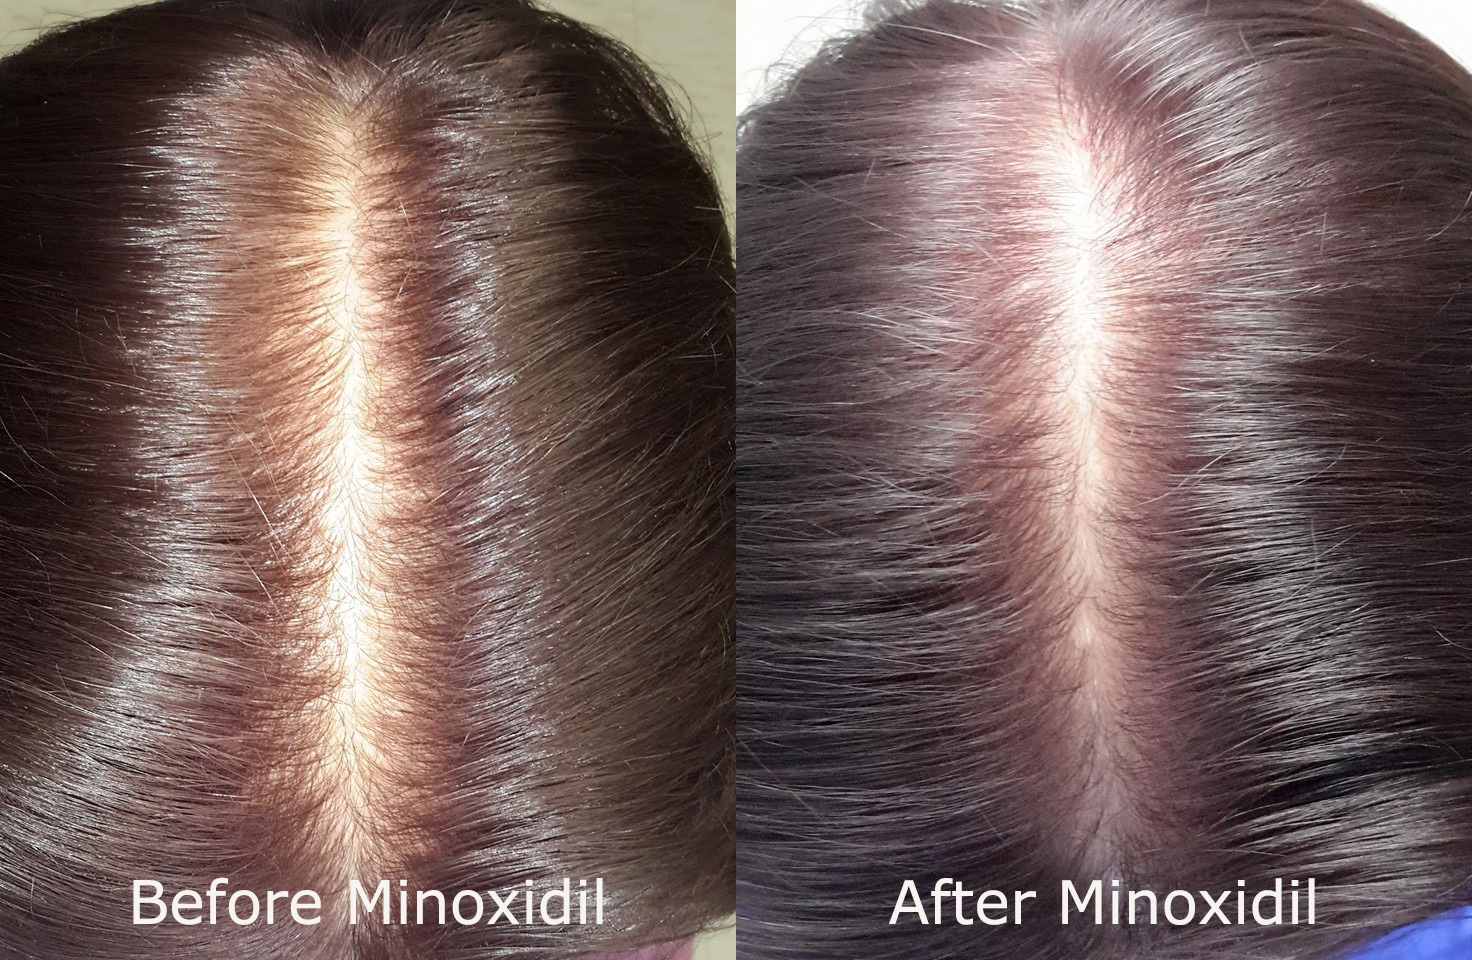 Can Rogaine (Minoxidil) Make Hair Loss Worse? | Limmer HTC